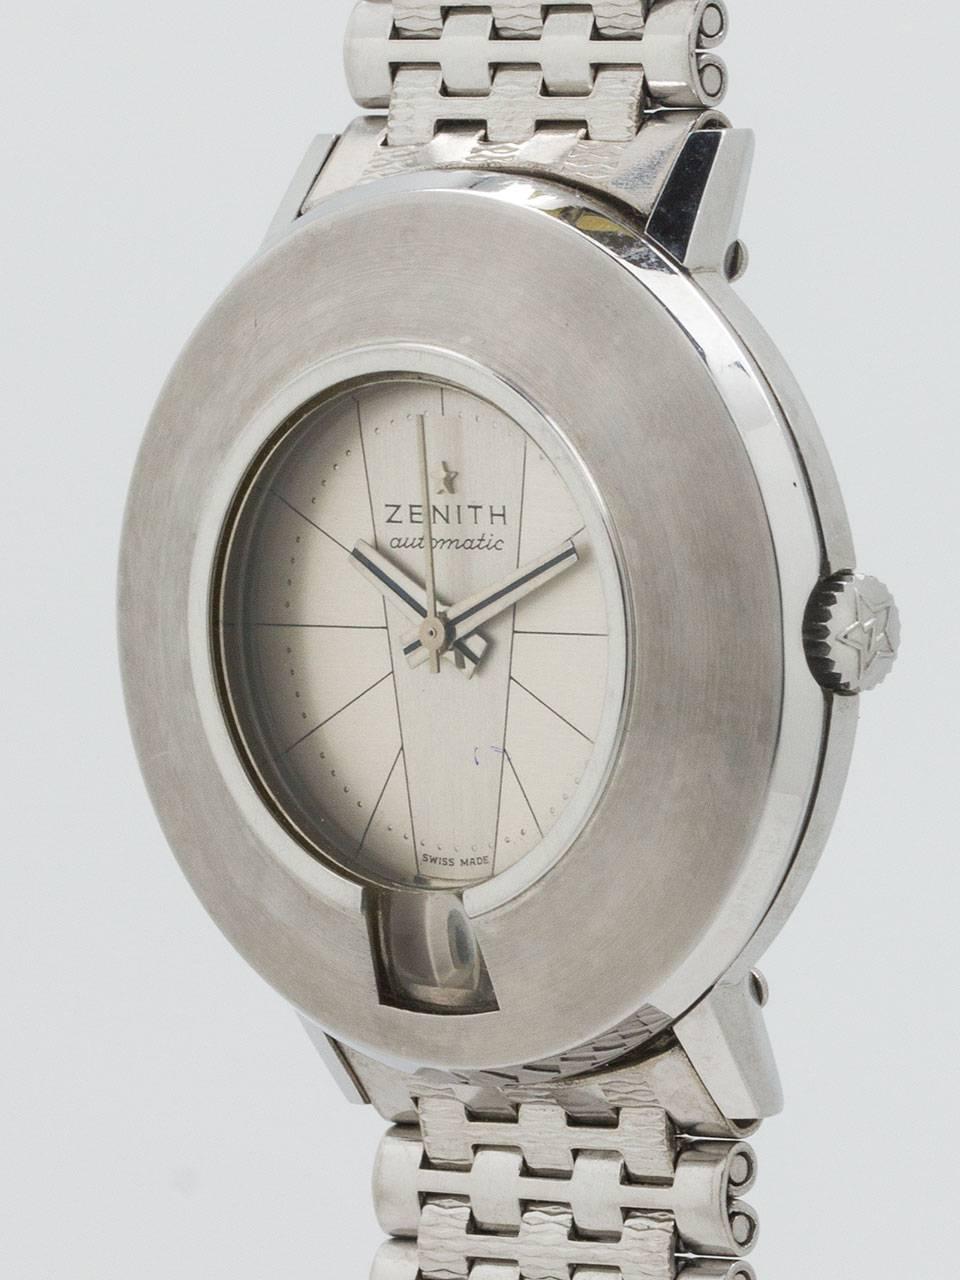 Zenith Stainless Steel Automatic Wristwatch  In Excellent Condition For Sale In West Hollywood, CA